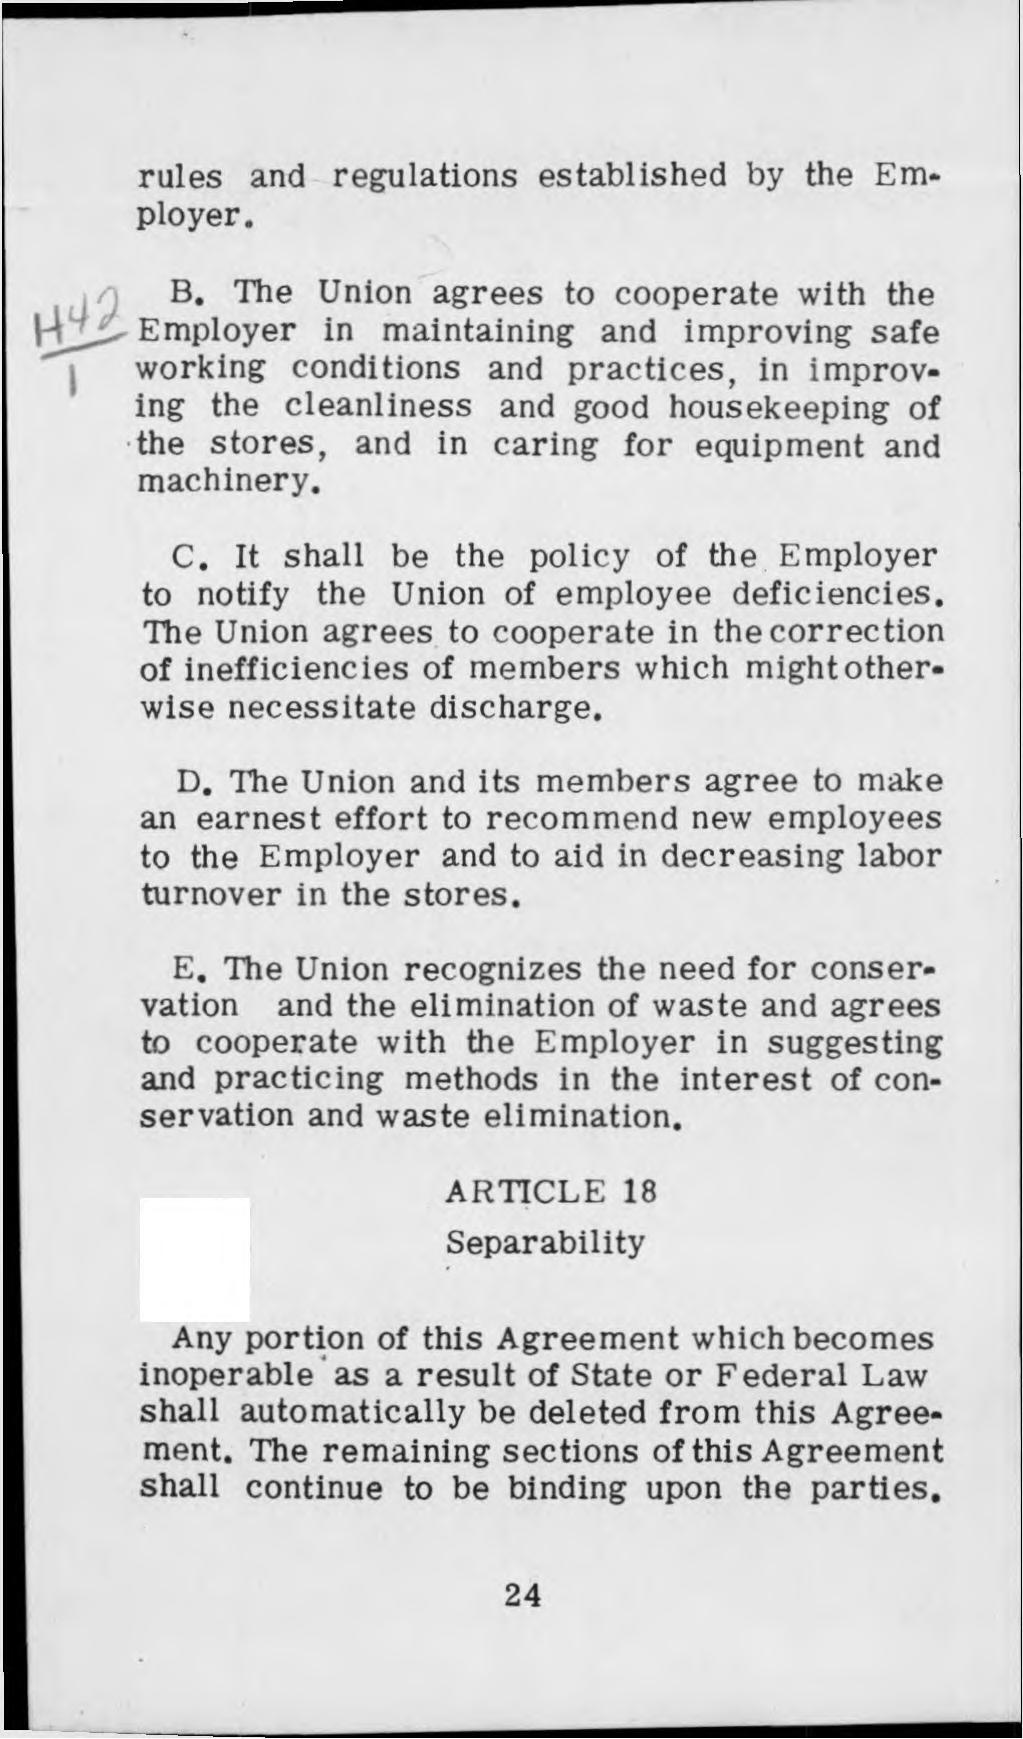 rules and regulations established by the Employer. B.